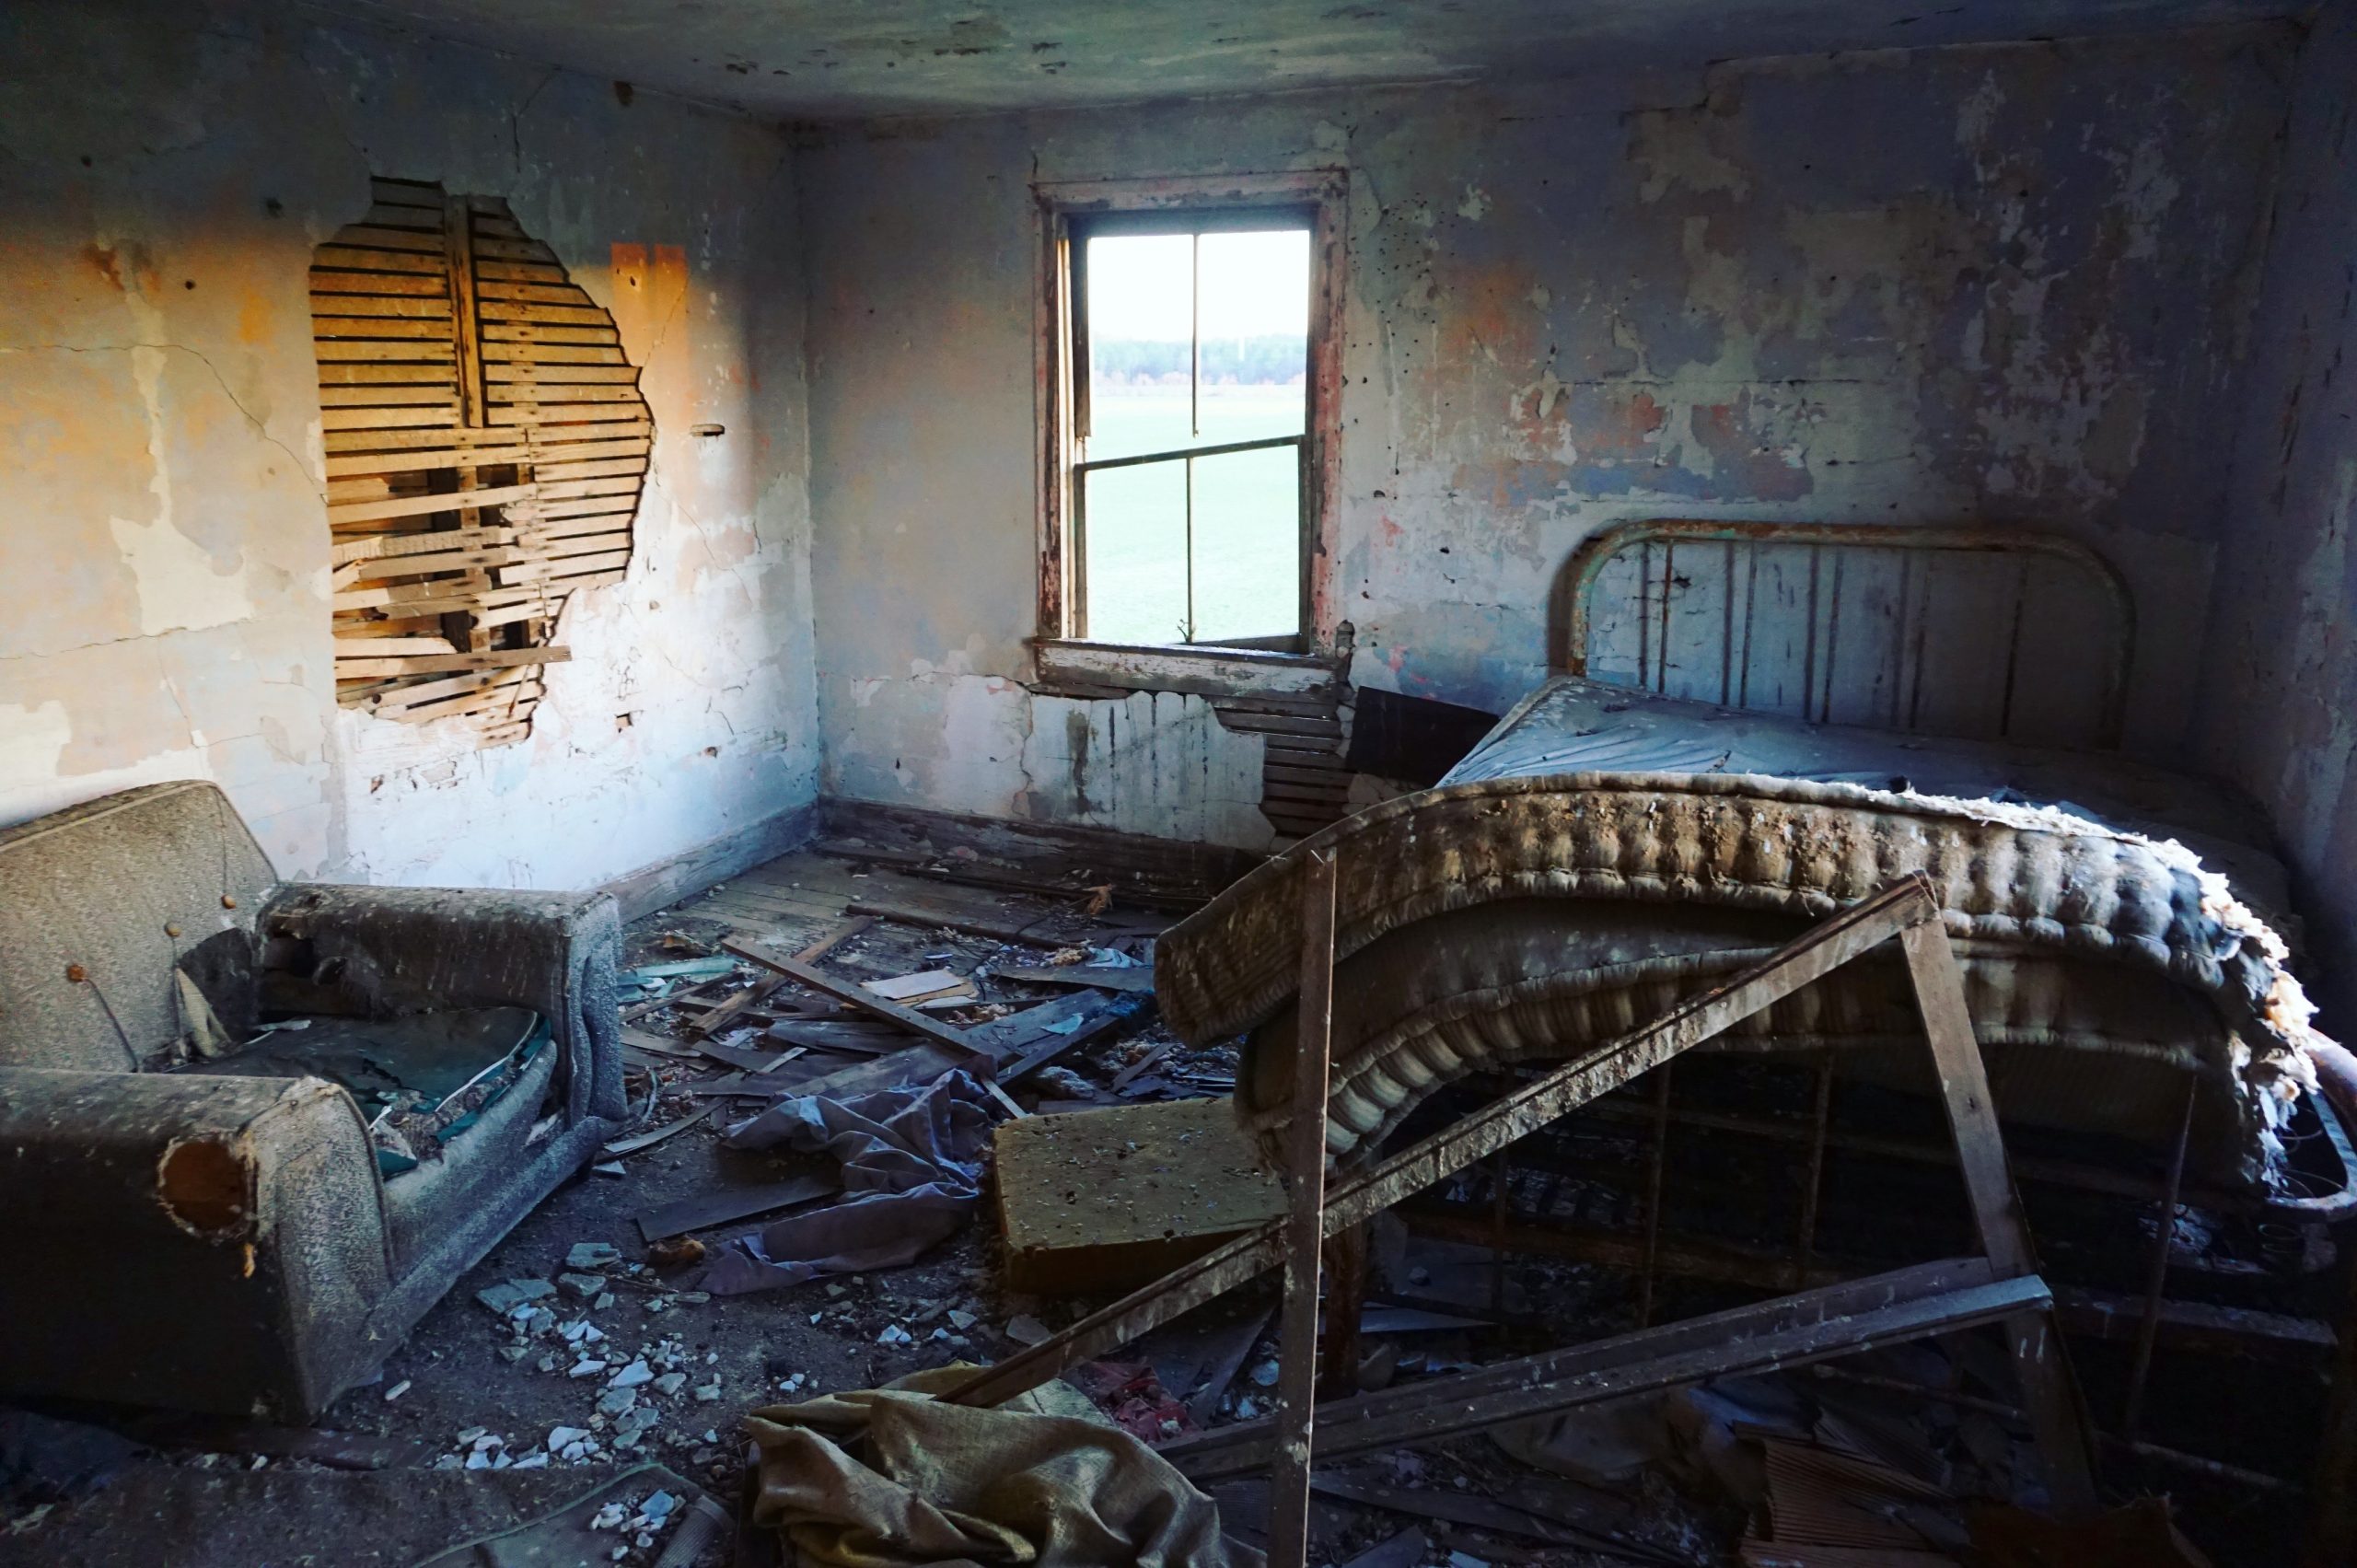 Derelict room with sagging bed and window, exposed timbers, mold